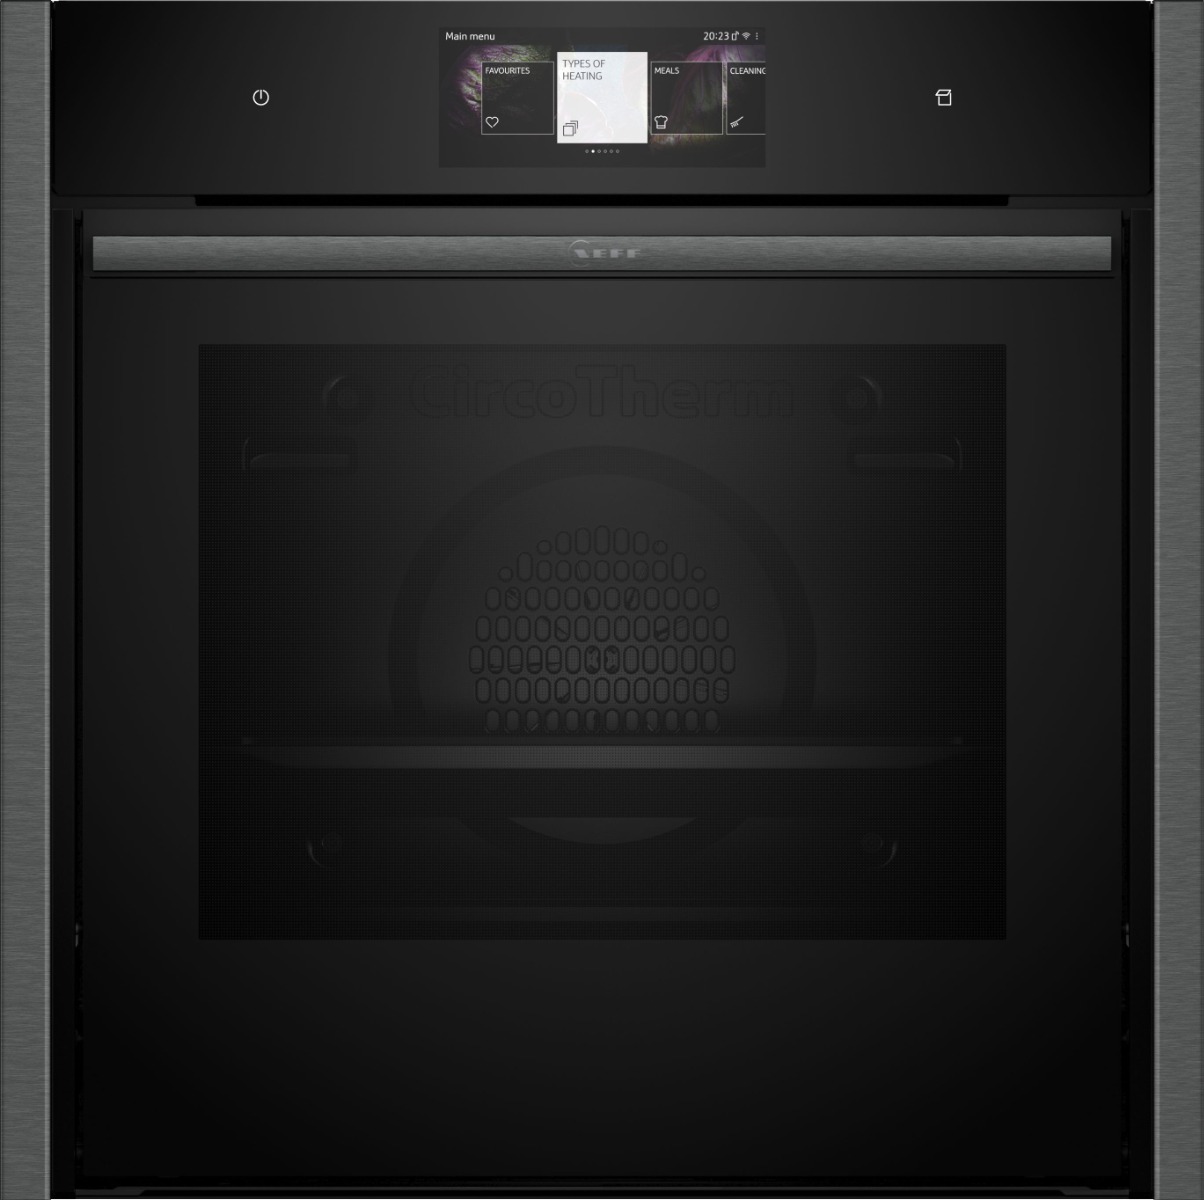 Neff B64VT73G0B Built-In Slide and Hide Single Pyrolytic Oven - Black with Graphite-Grey Trim